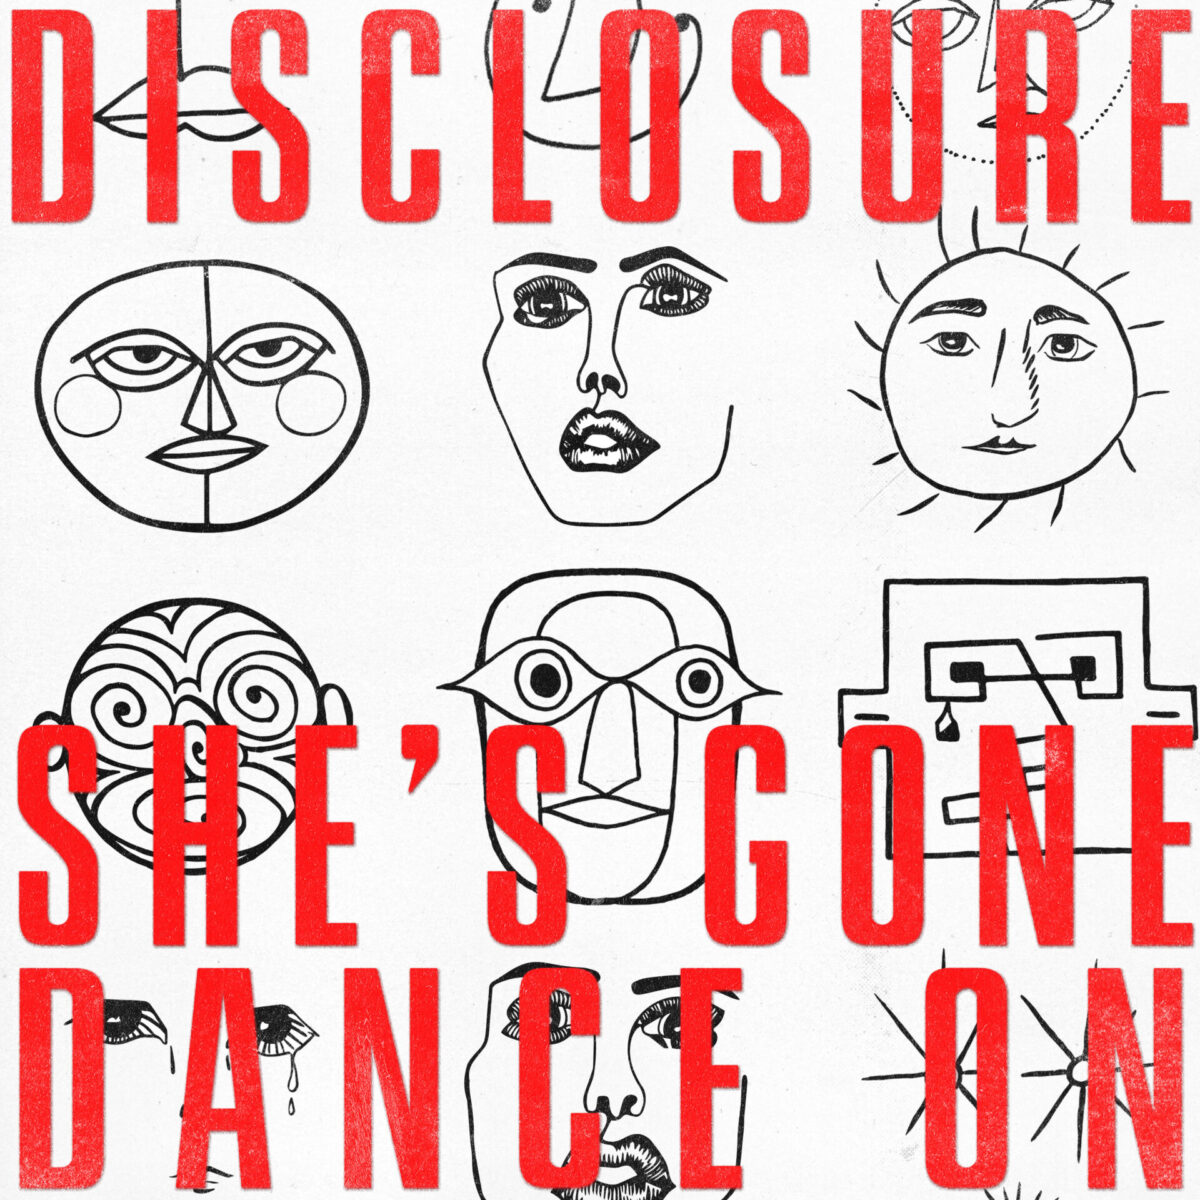 disclosure surprises with new single shes gone dance on unnamed